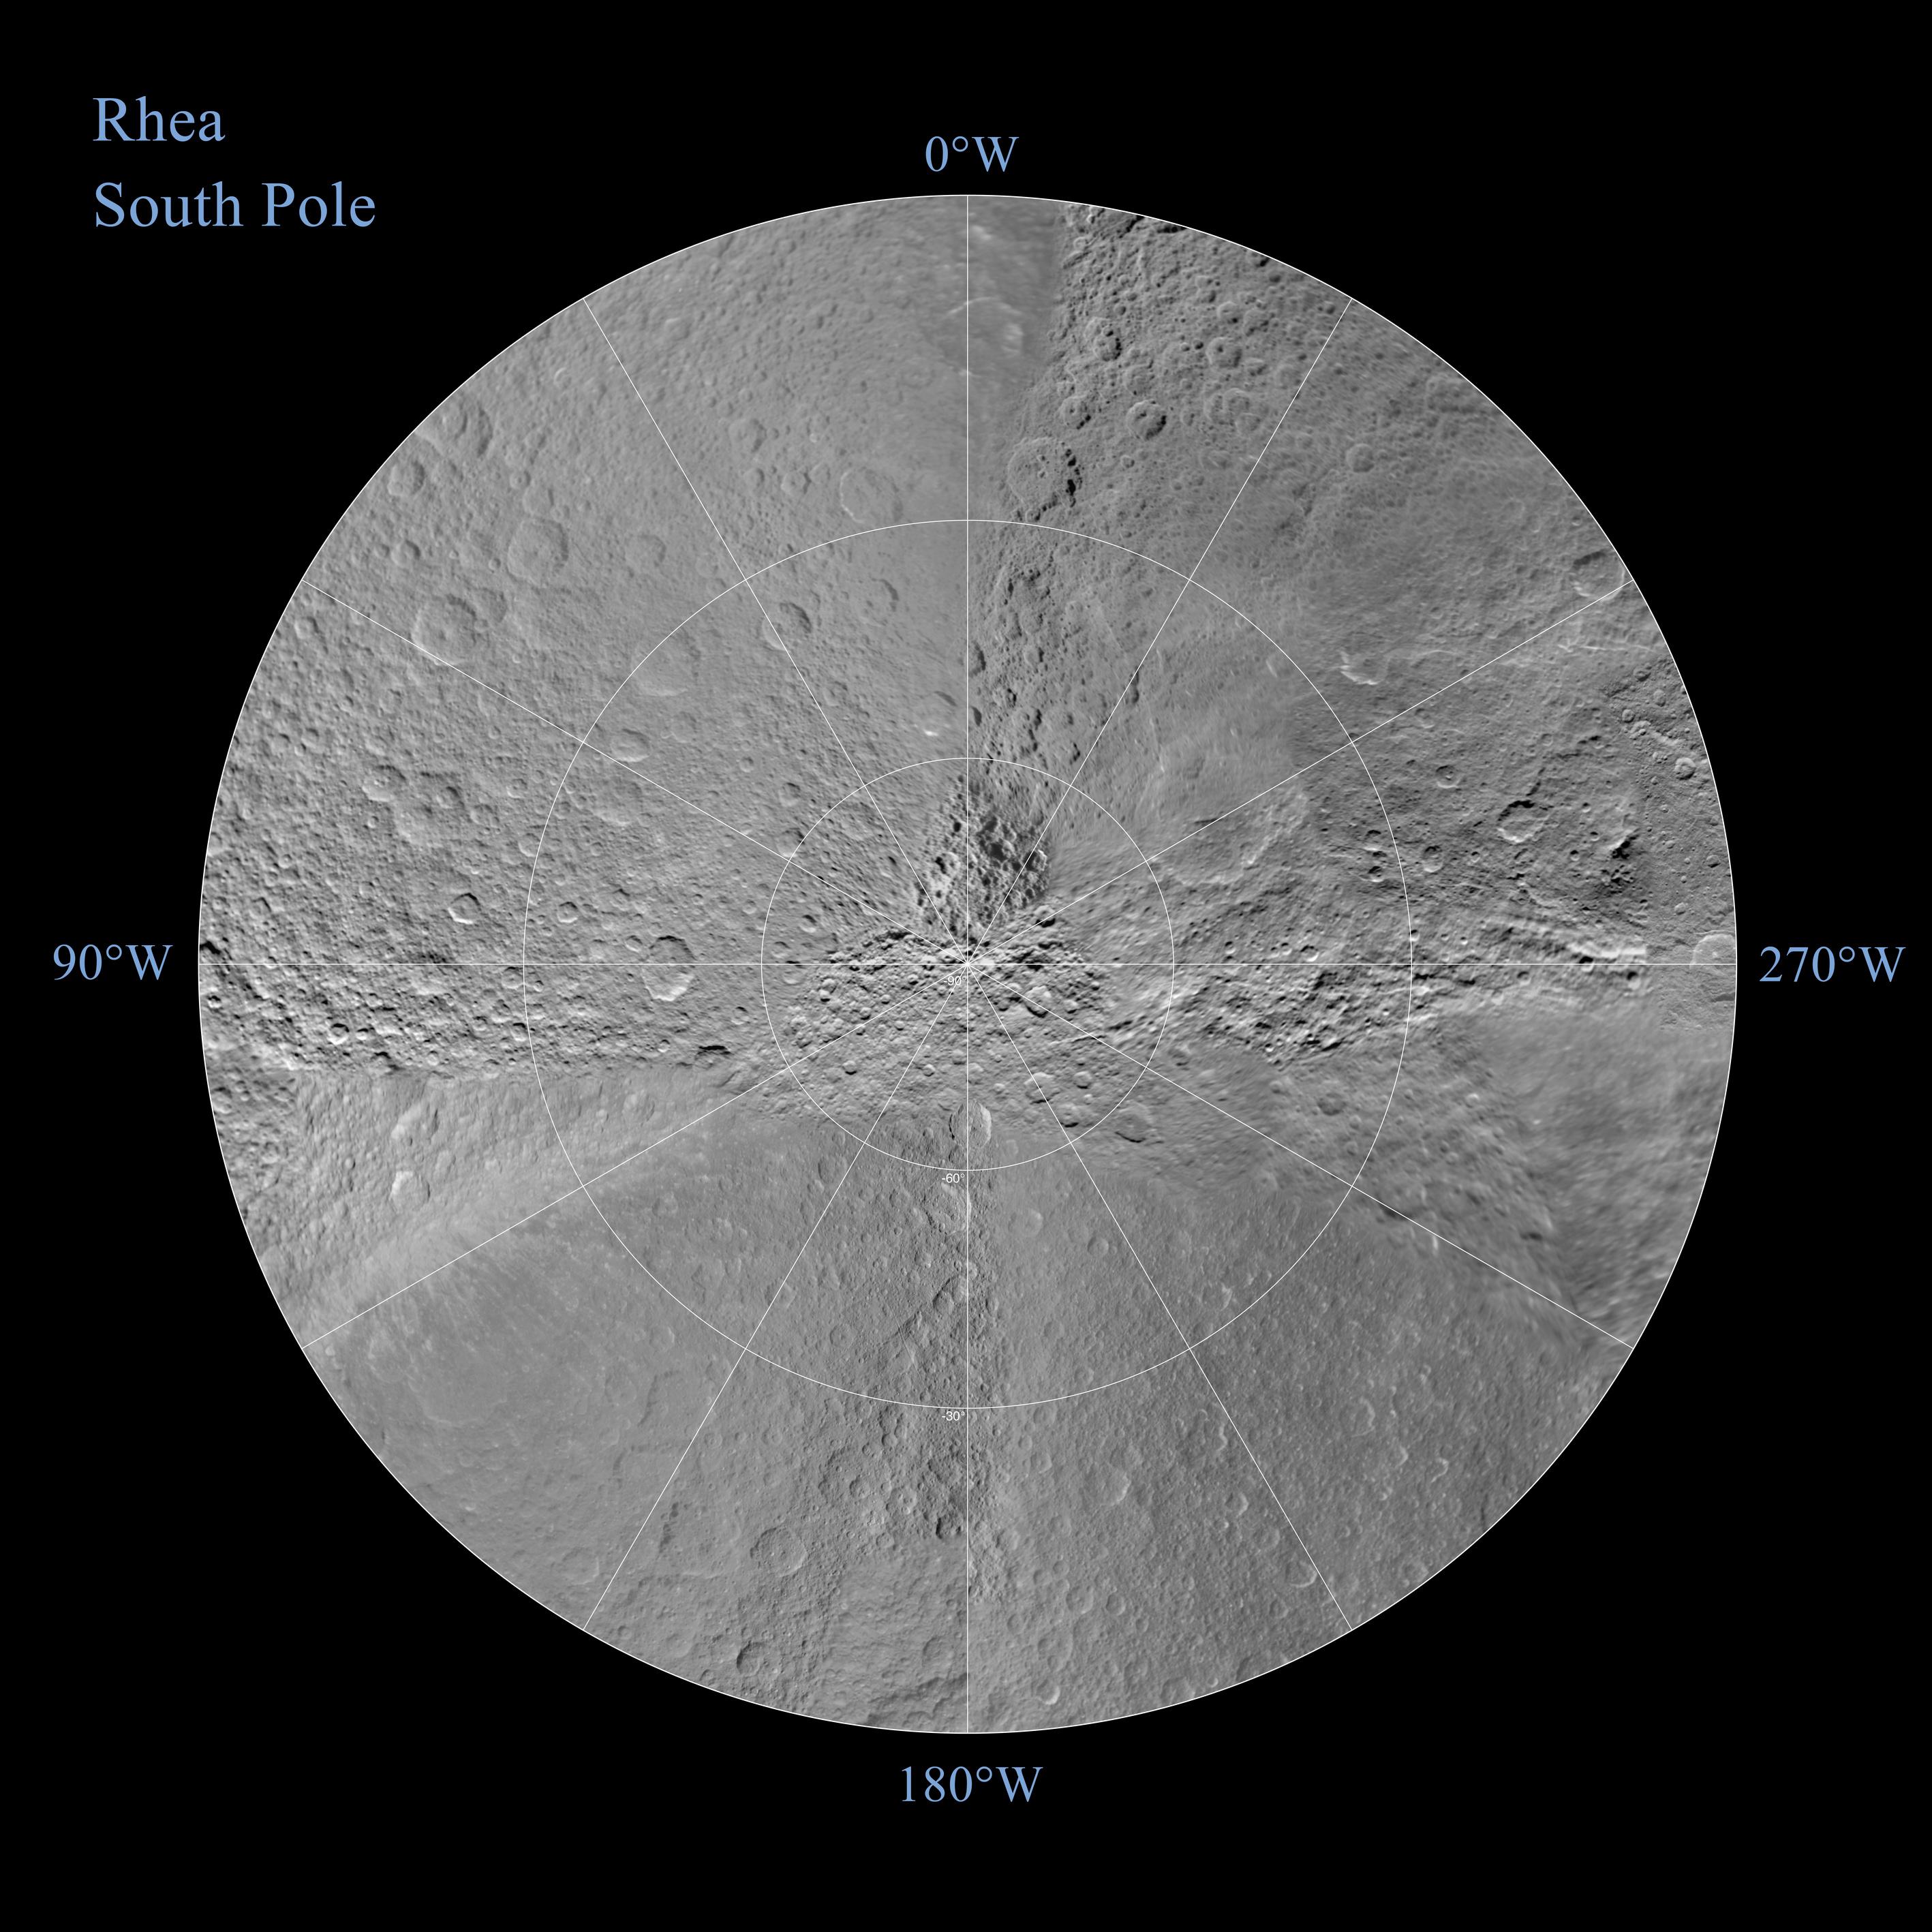 A polar stereographic map of Rhea